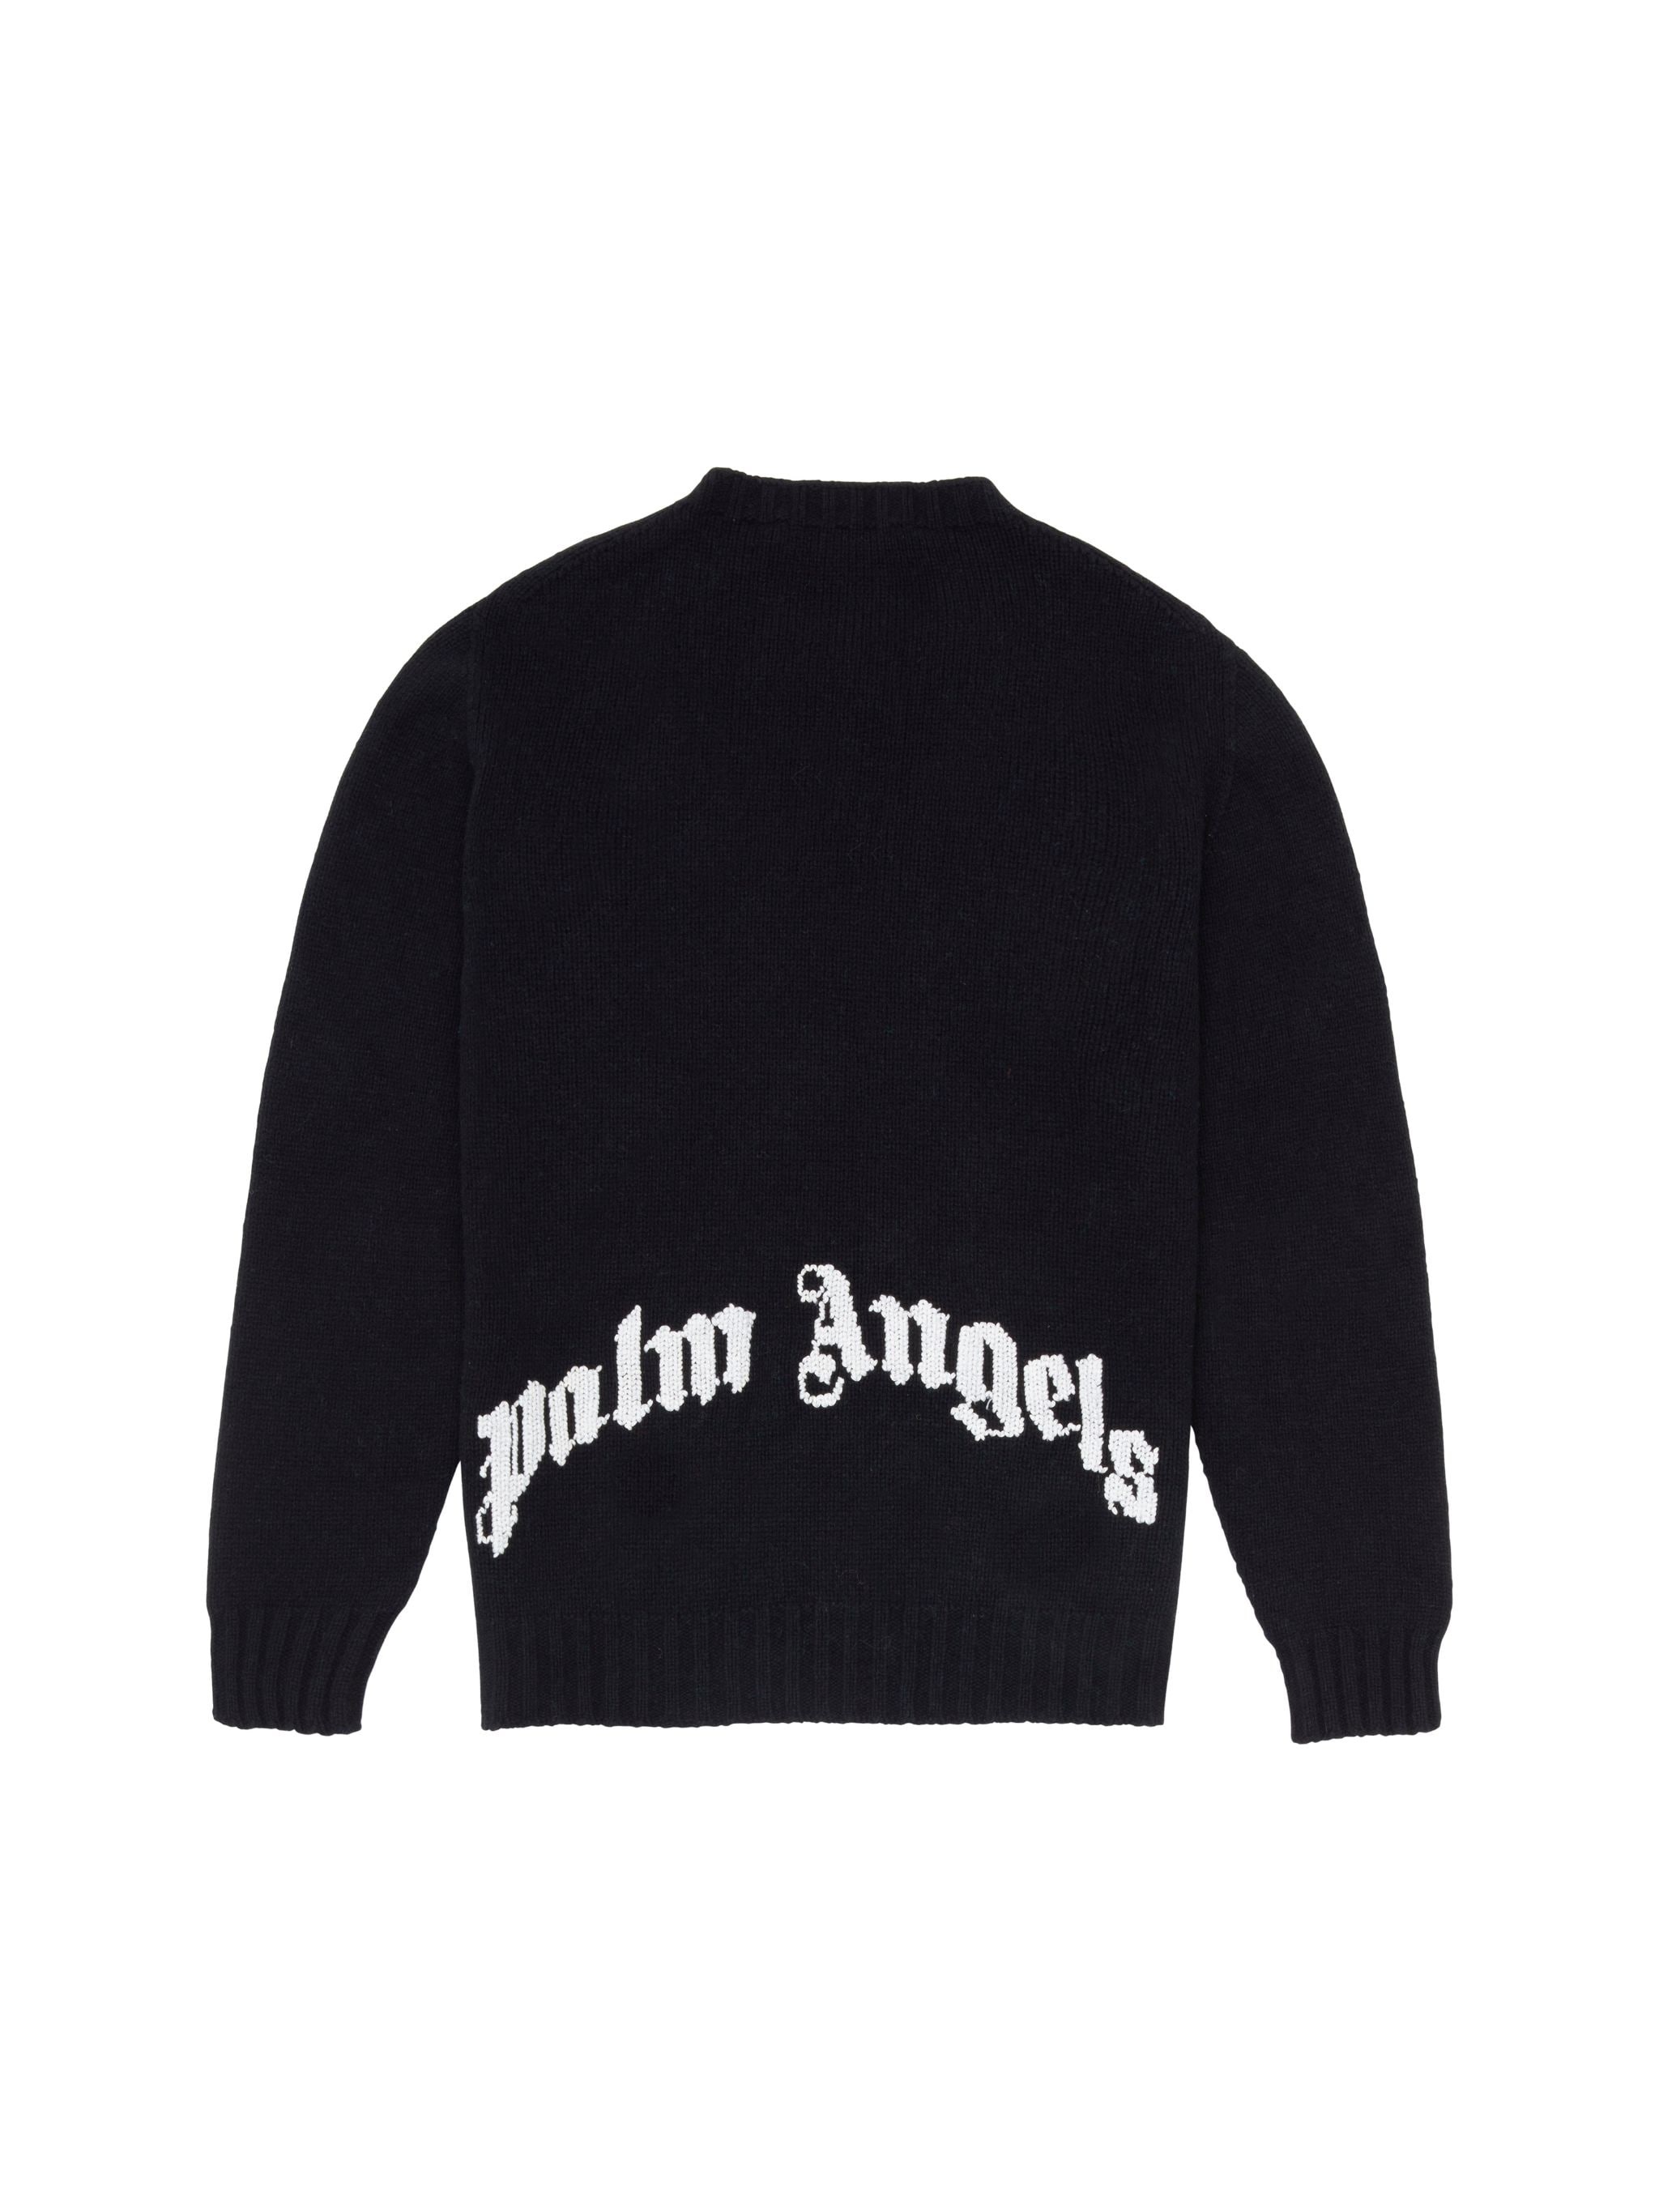 CURVED LOGO SWEATER - 7